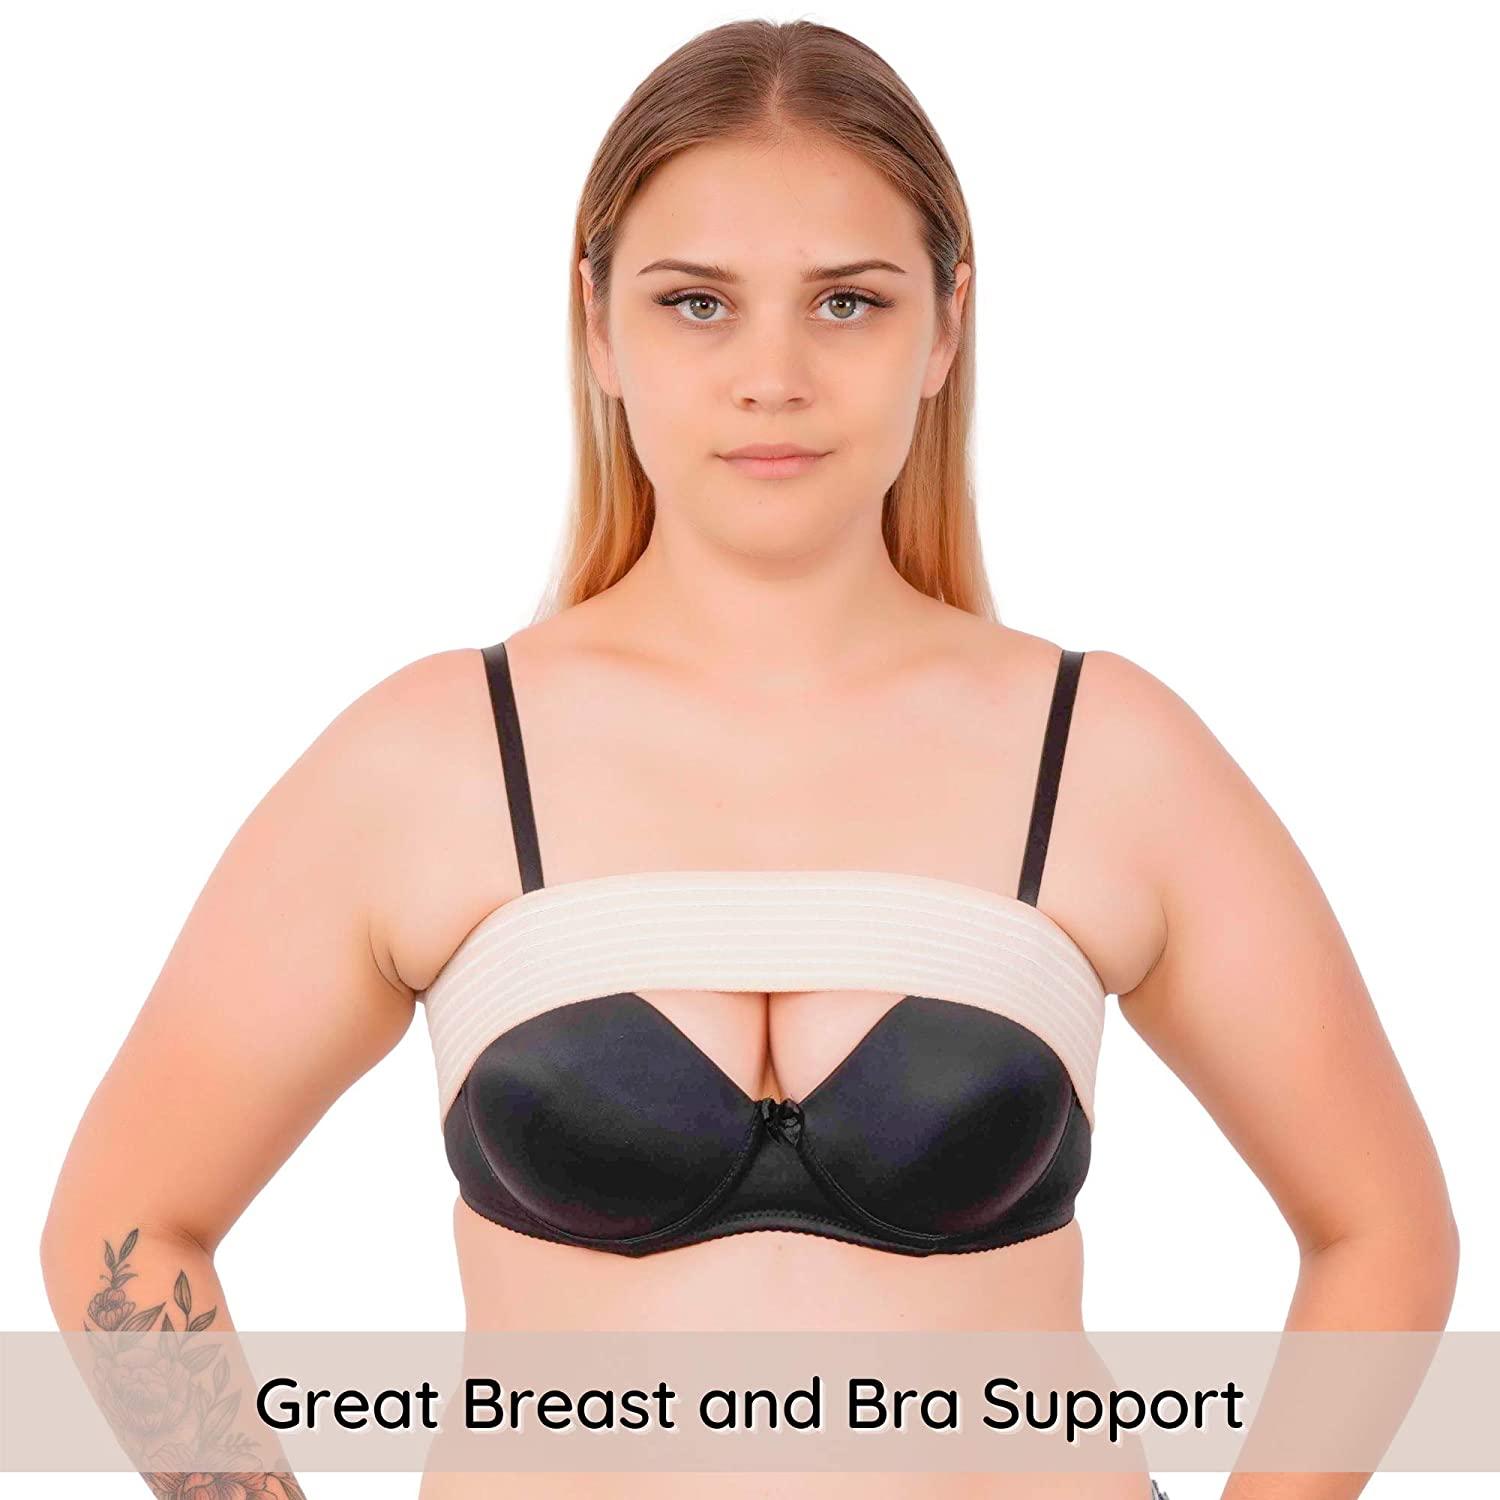  Post Surgical Breast Implant Stabilizer and Compression Band,  Breast Support Band, Chest Belt, Adjustable Extra Sport Bra Strap, One Size  Fits All (Black) : ביגוד, נעליים ותכשיטים